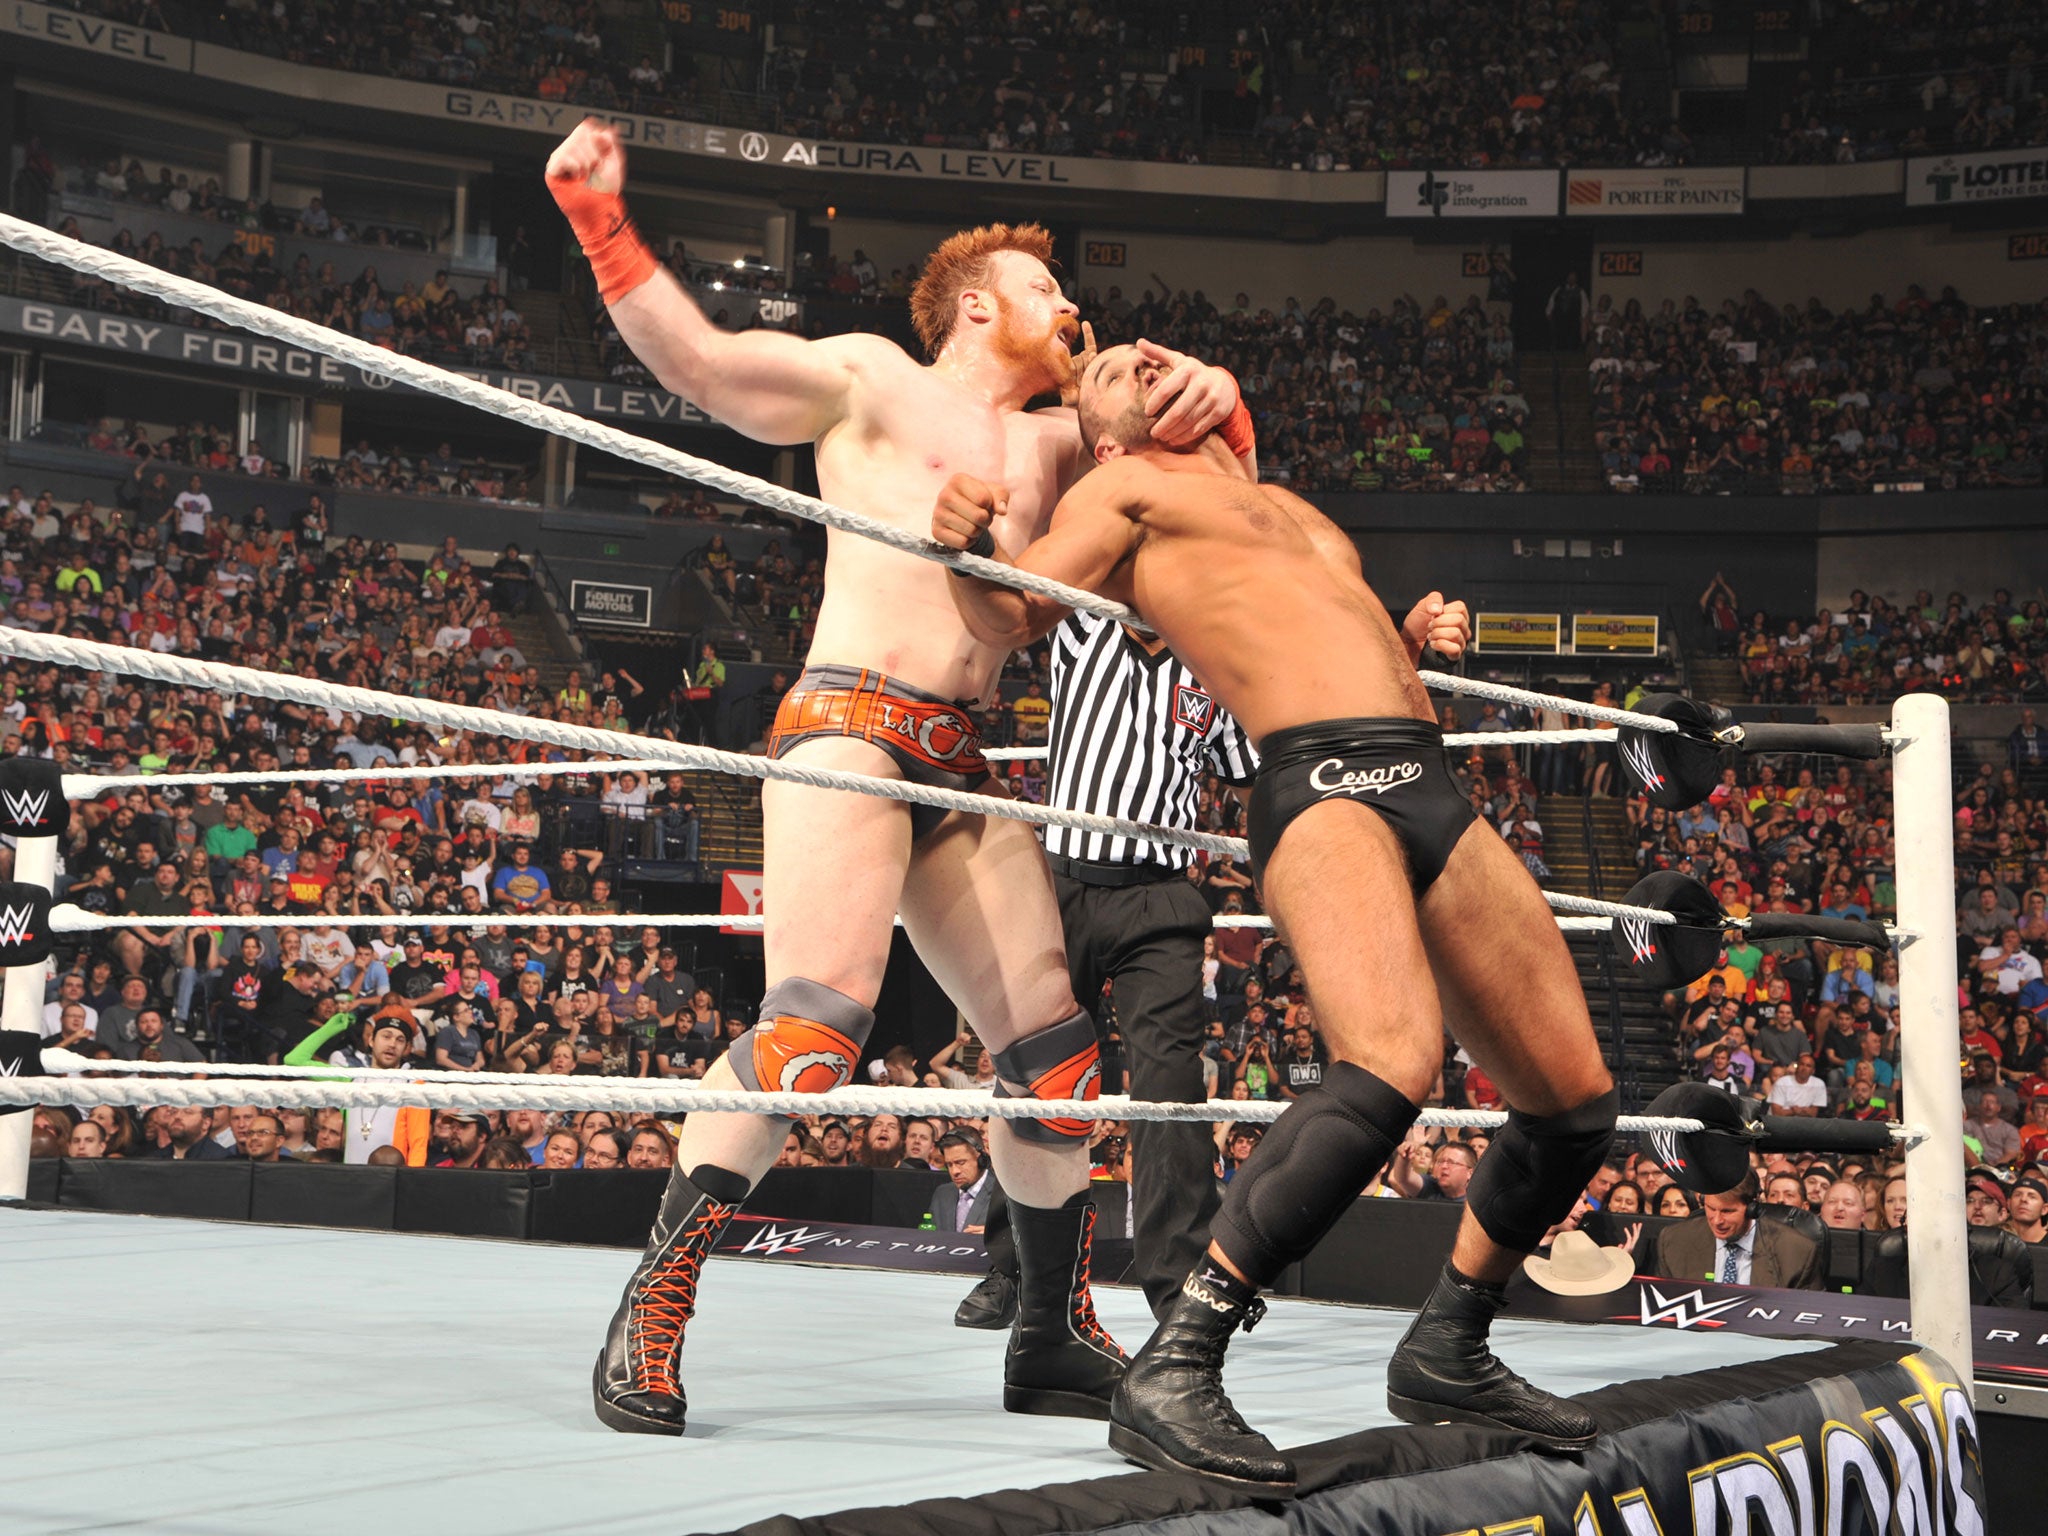 Sheamus ties up Cesaro on the ropes